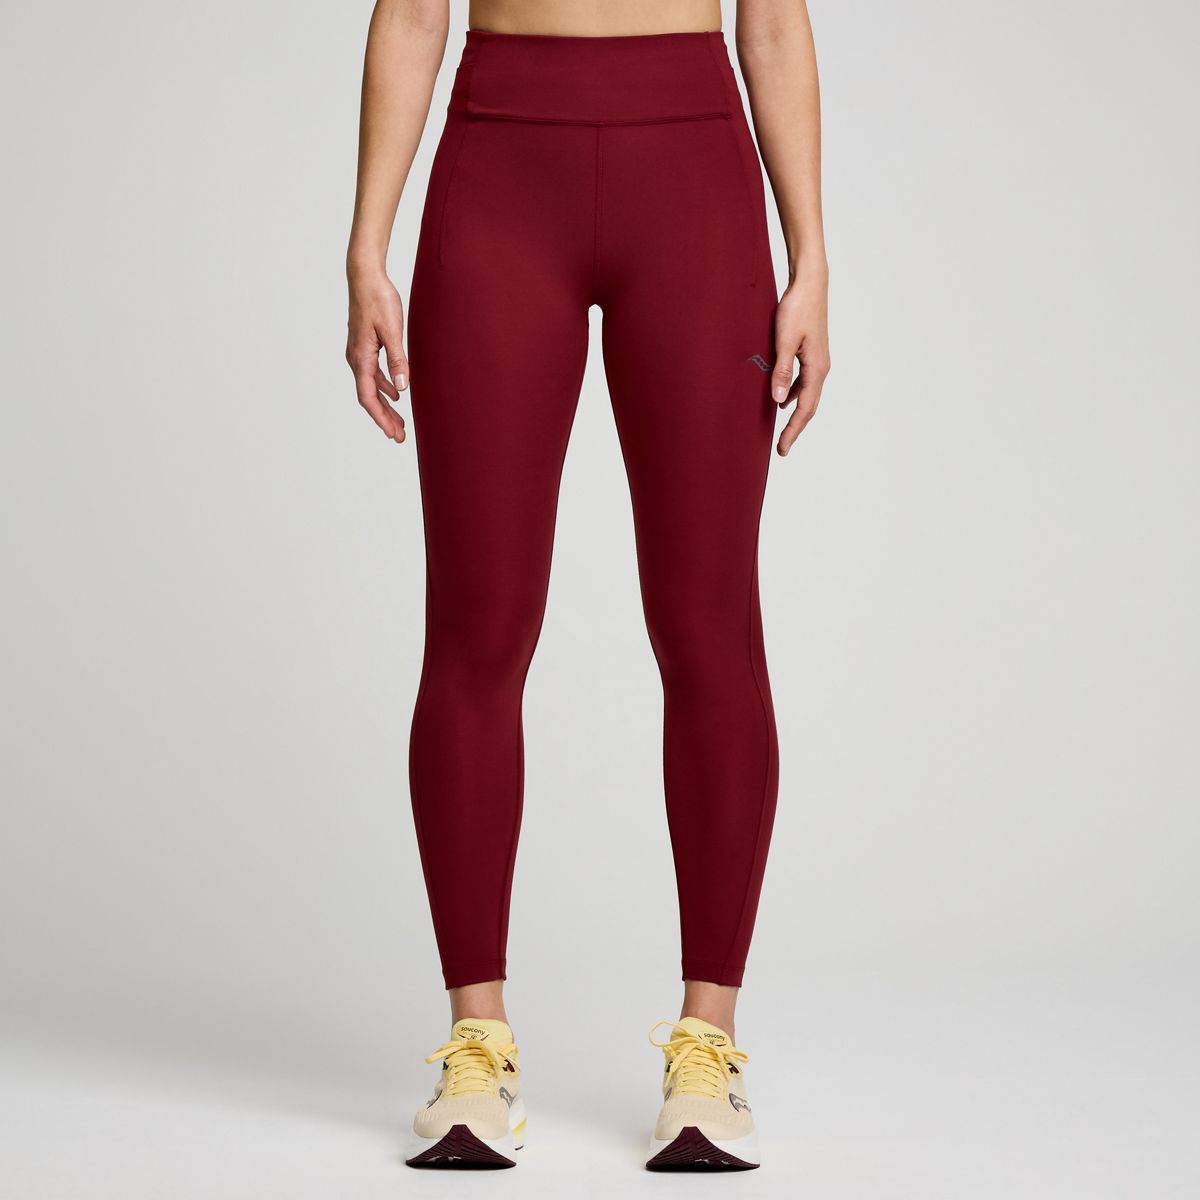 Women's Fortify 7/8 Tight